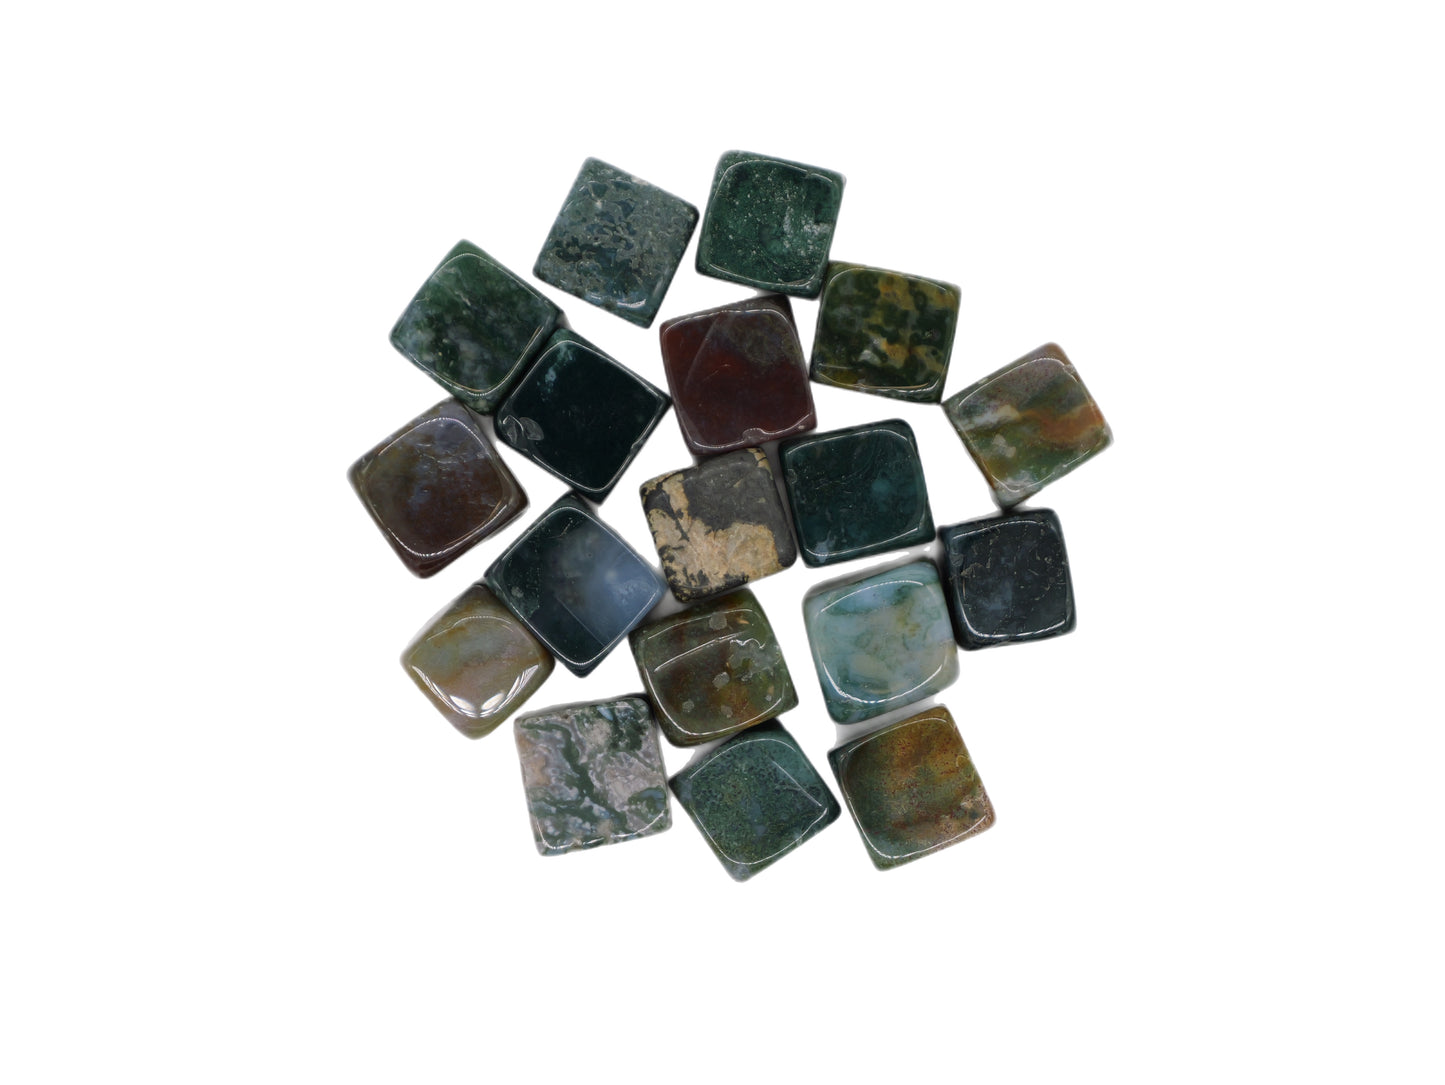 Agate Cubes with Moss Inclusions